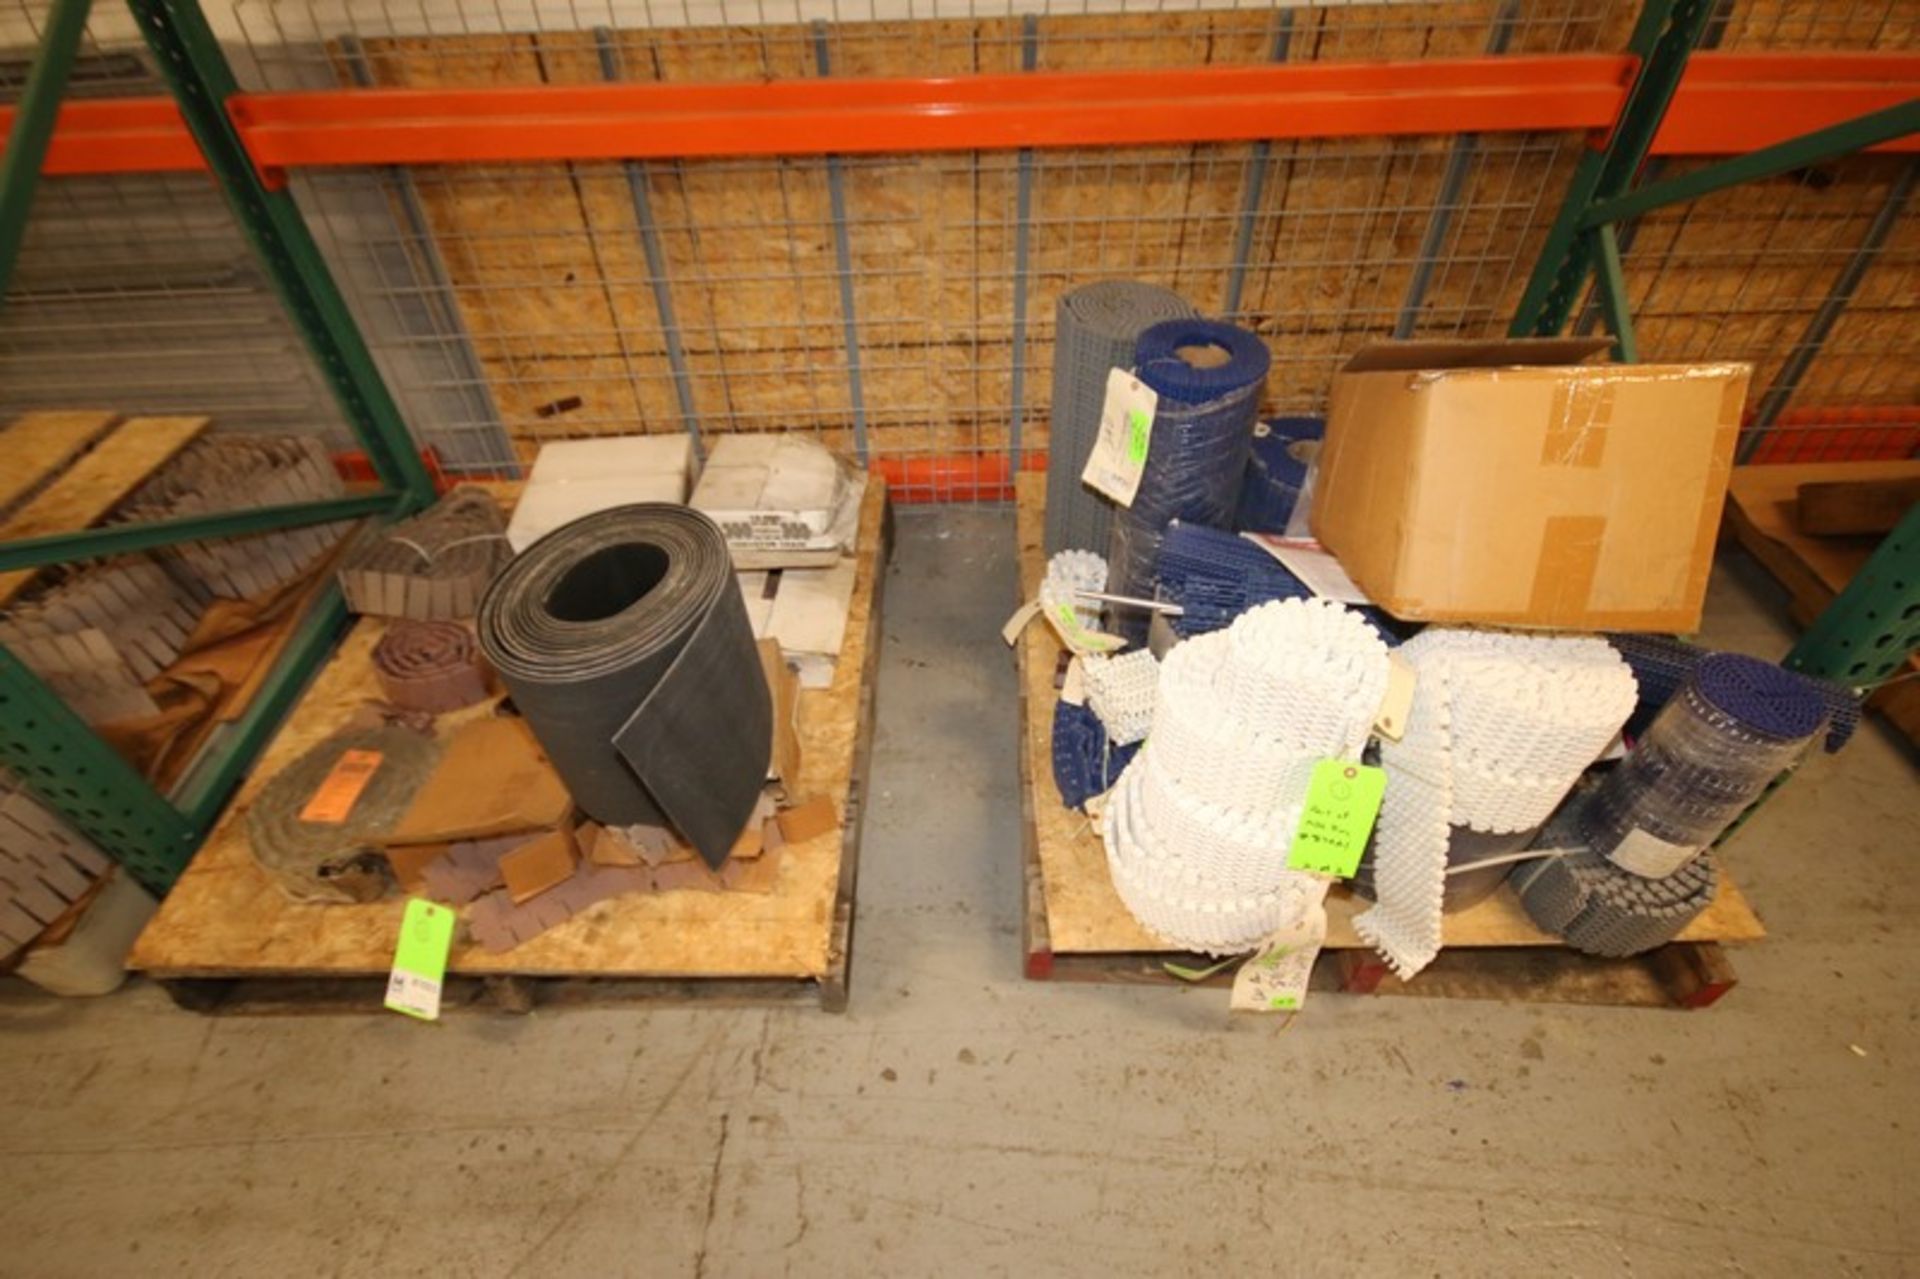 (2) Pallets of Assorted New and Used Rexnord,Regina, Uni & Intralox, Plastic Conveyor Chain, From